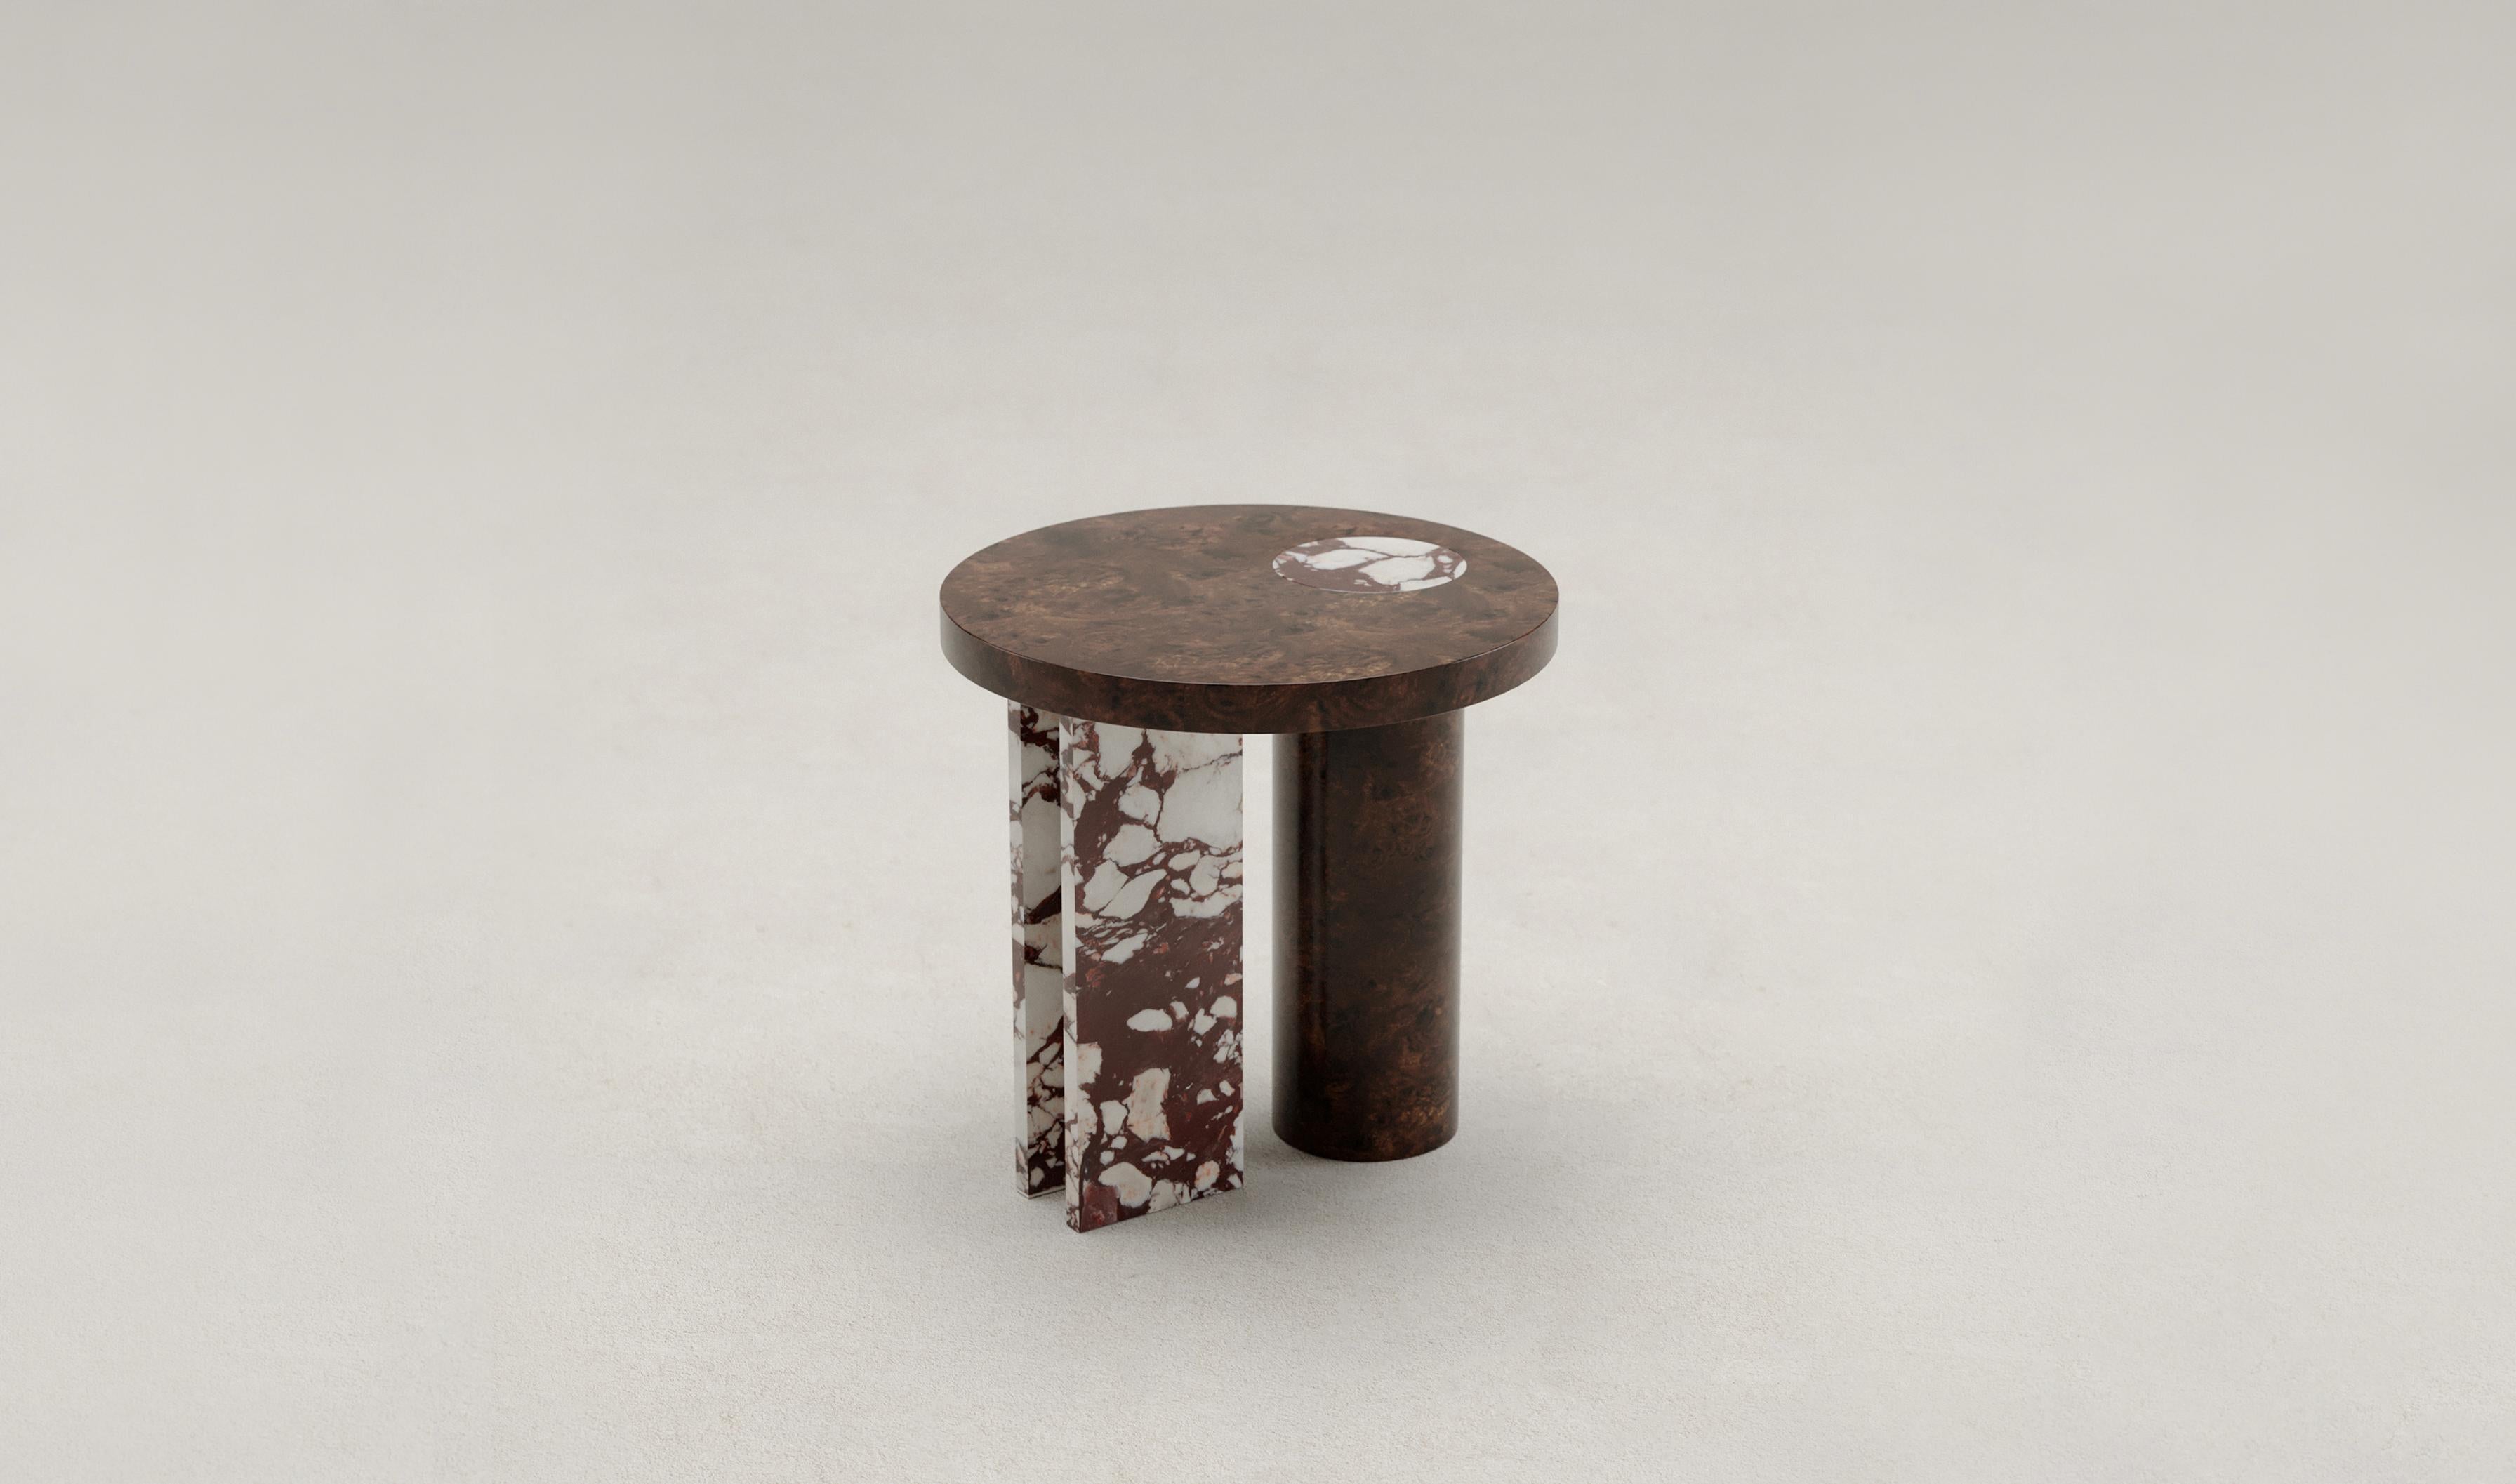 Salvante S1 side table by Piotr Dabrowa
Unique Piece
Dimensions: D 50 x H 50 cm
Materials: Calacatta Viola marble, walnut burl.
Also available: Botticino marble, Rosa Peralba marble.

Salvante table collection is a play between shapes,